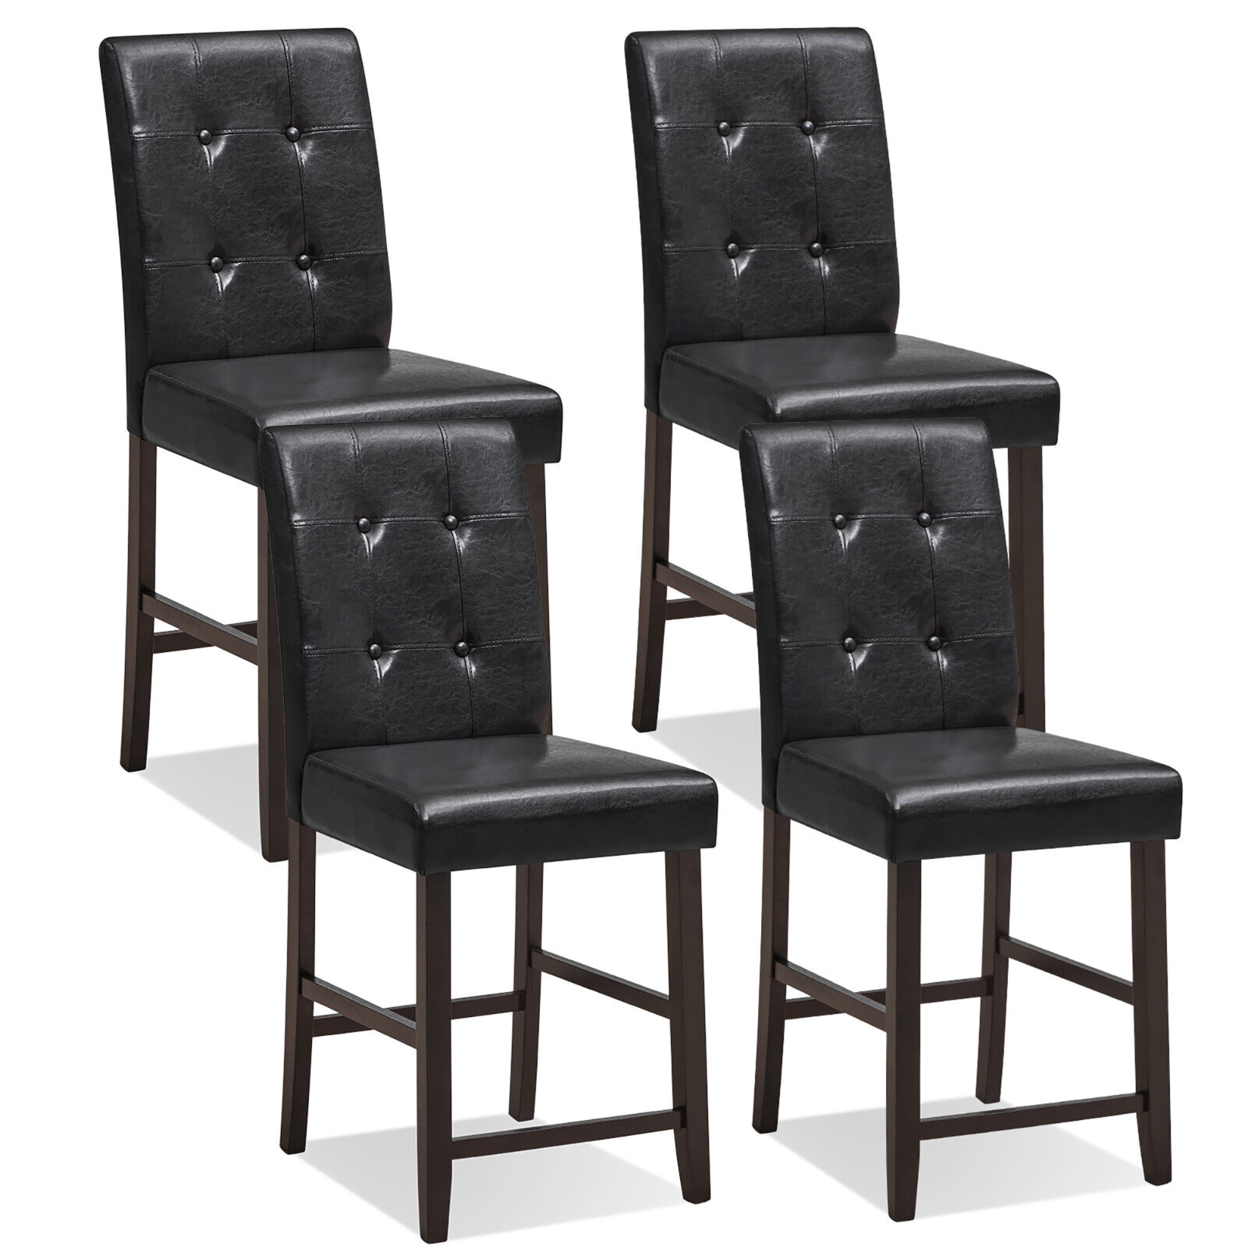 Set Of 4 Bar Stools Tufted Counter Height Pub Kitchen Chairs W/ Rubber Wood Legs